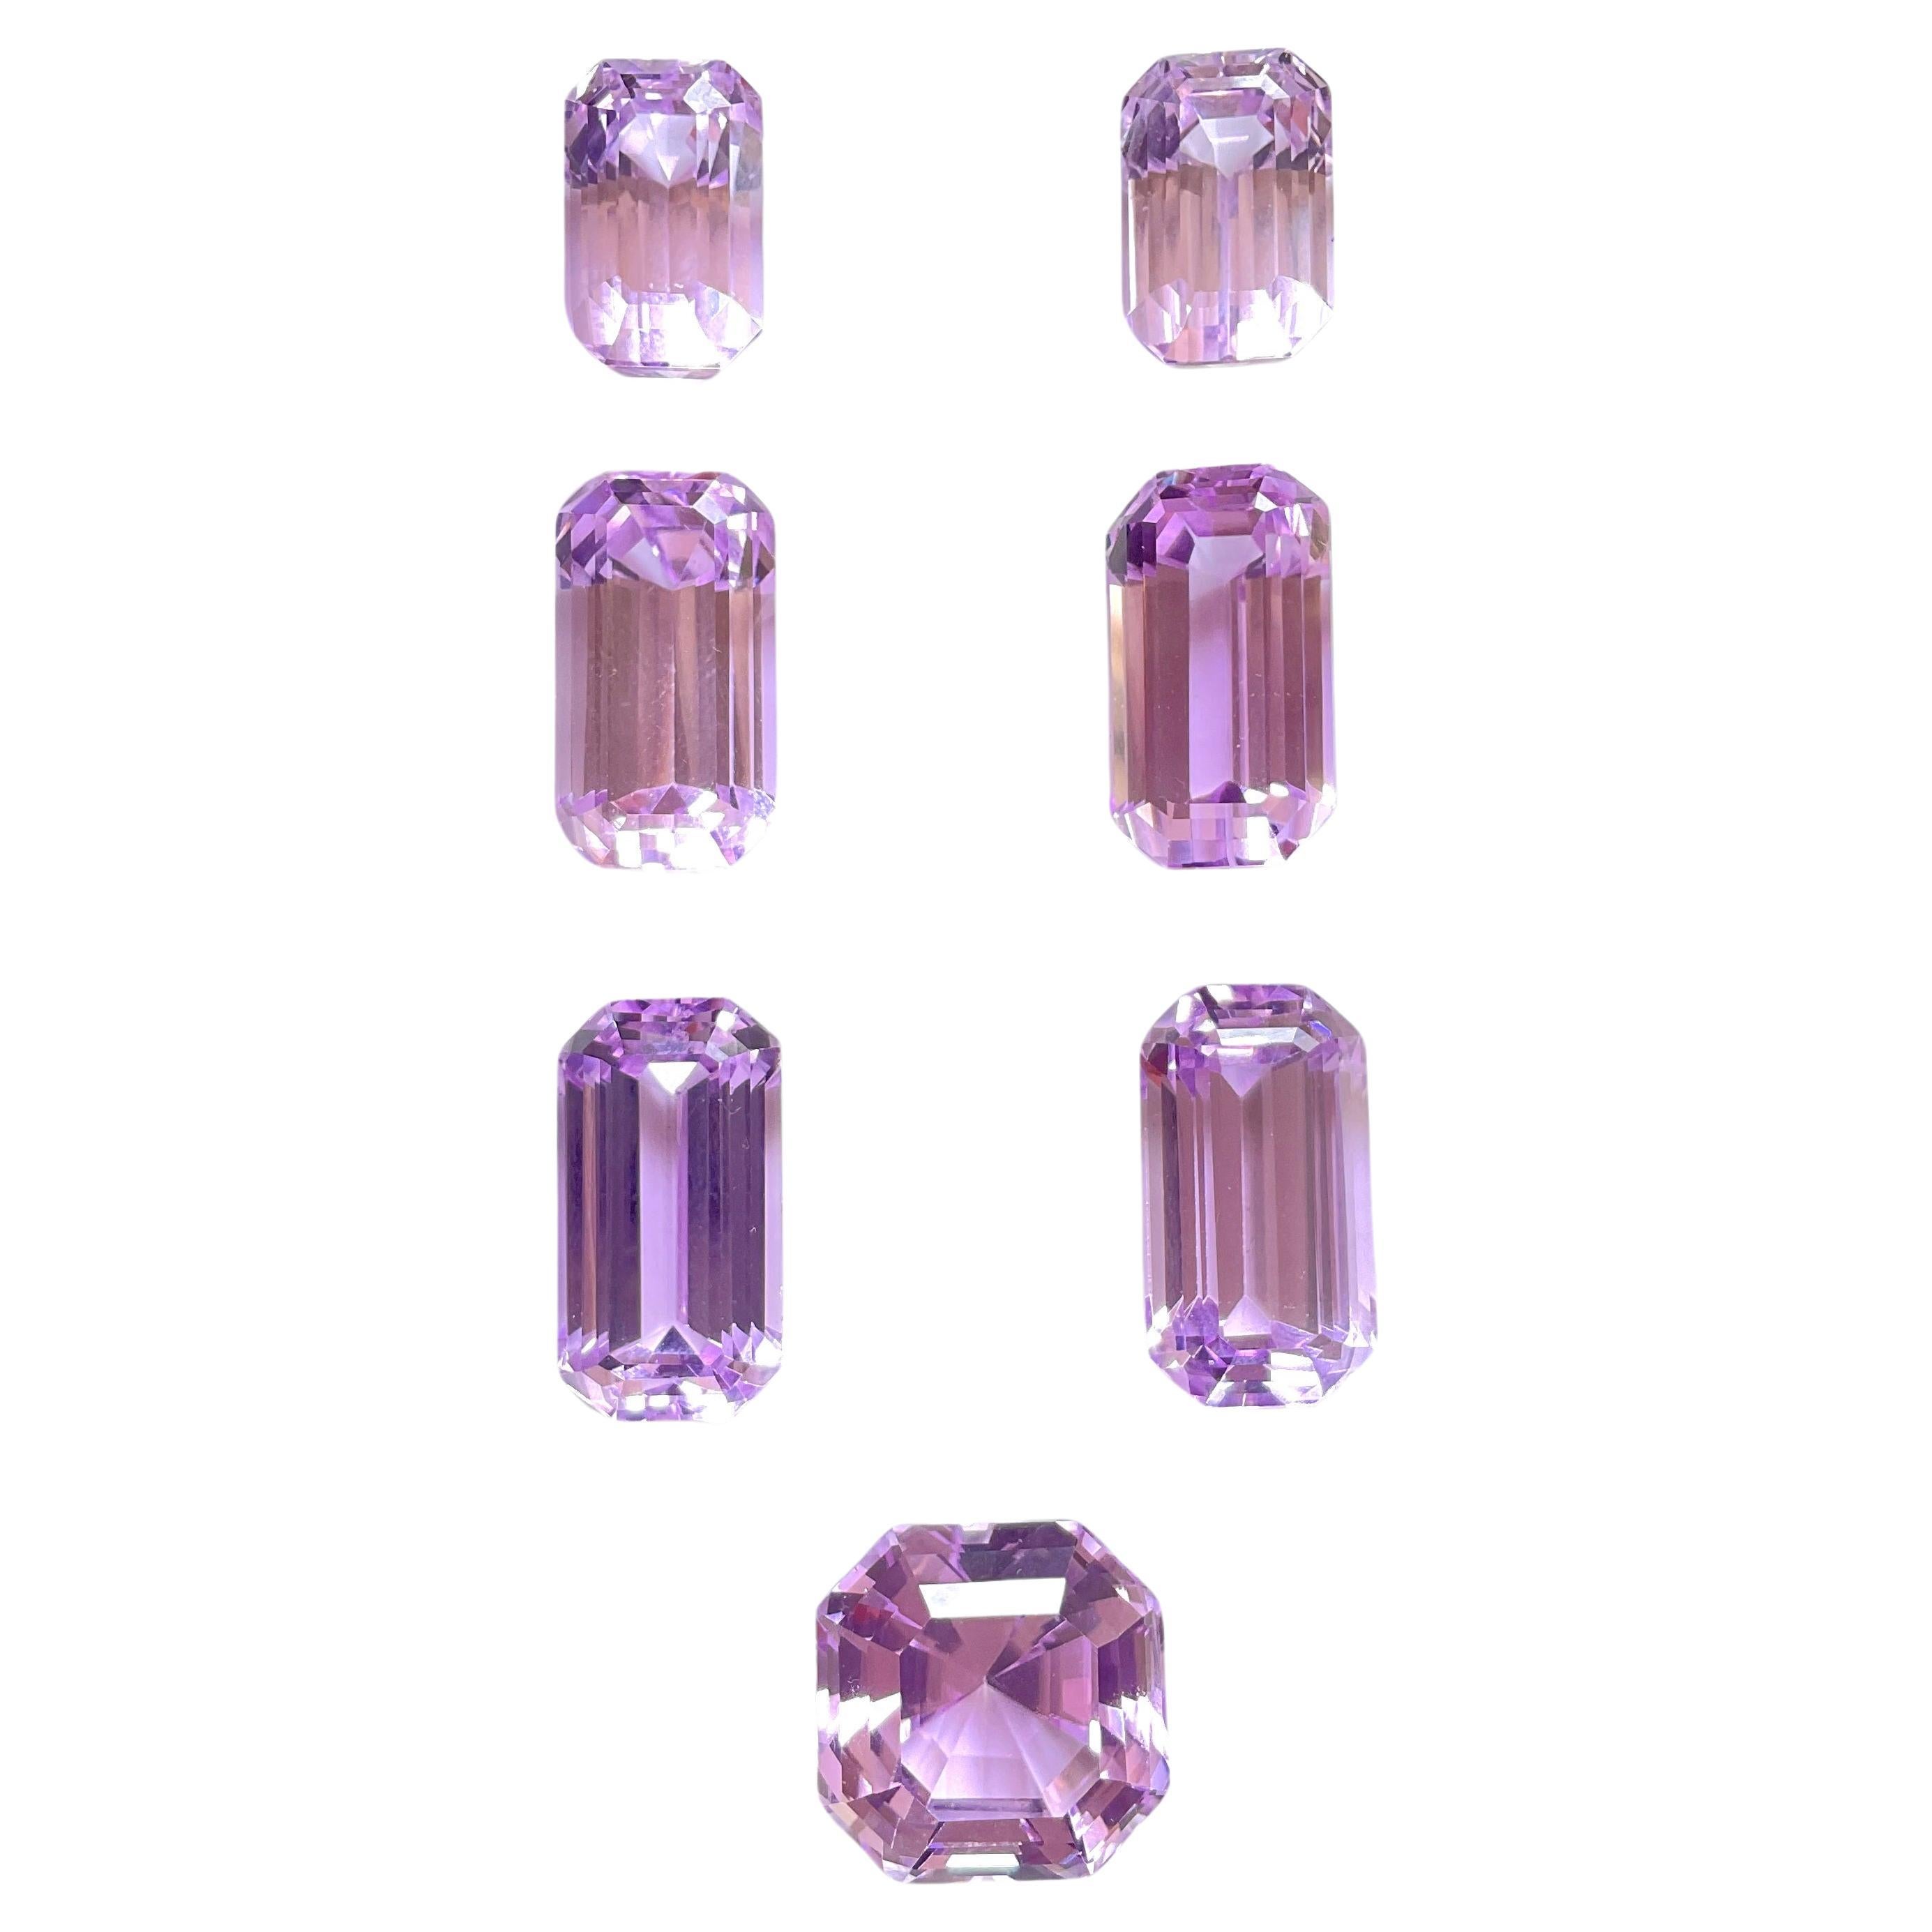 This piece is in a sweet bright pink, the unique cutting style, can be an interesting material for eye-catching jewelry.
Pink Kunzite 171.57 carats Layout Natural Cut Stone For Fine Gem Jewellery Gem
Weight: 171.57 Carats
Size - Size - Octagon